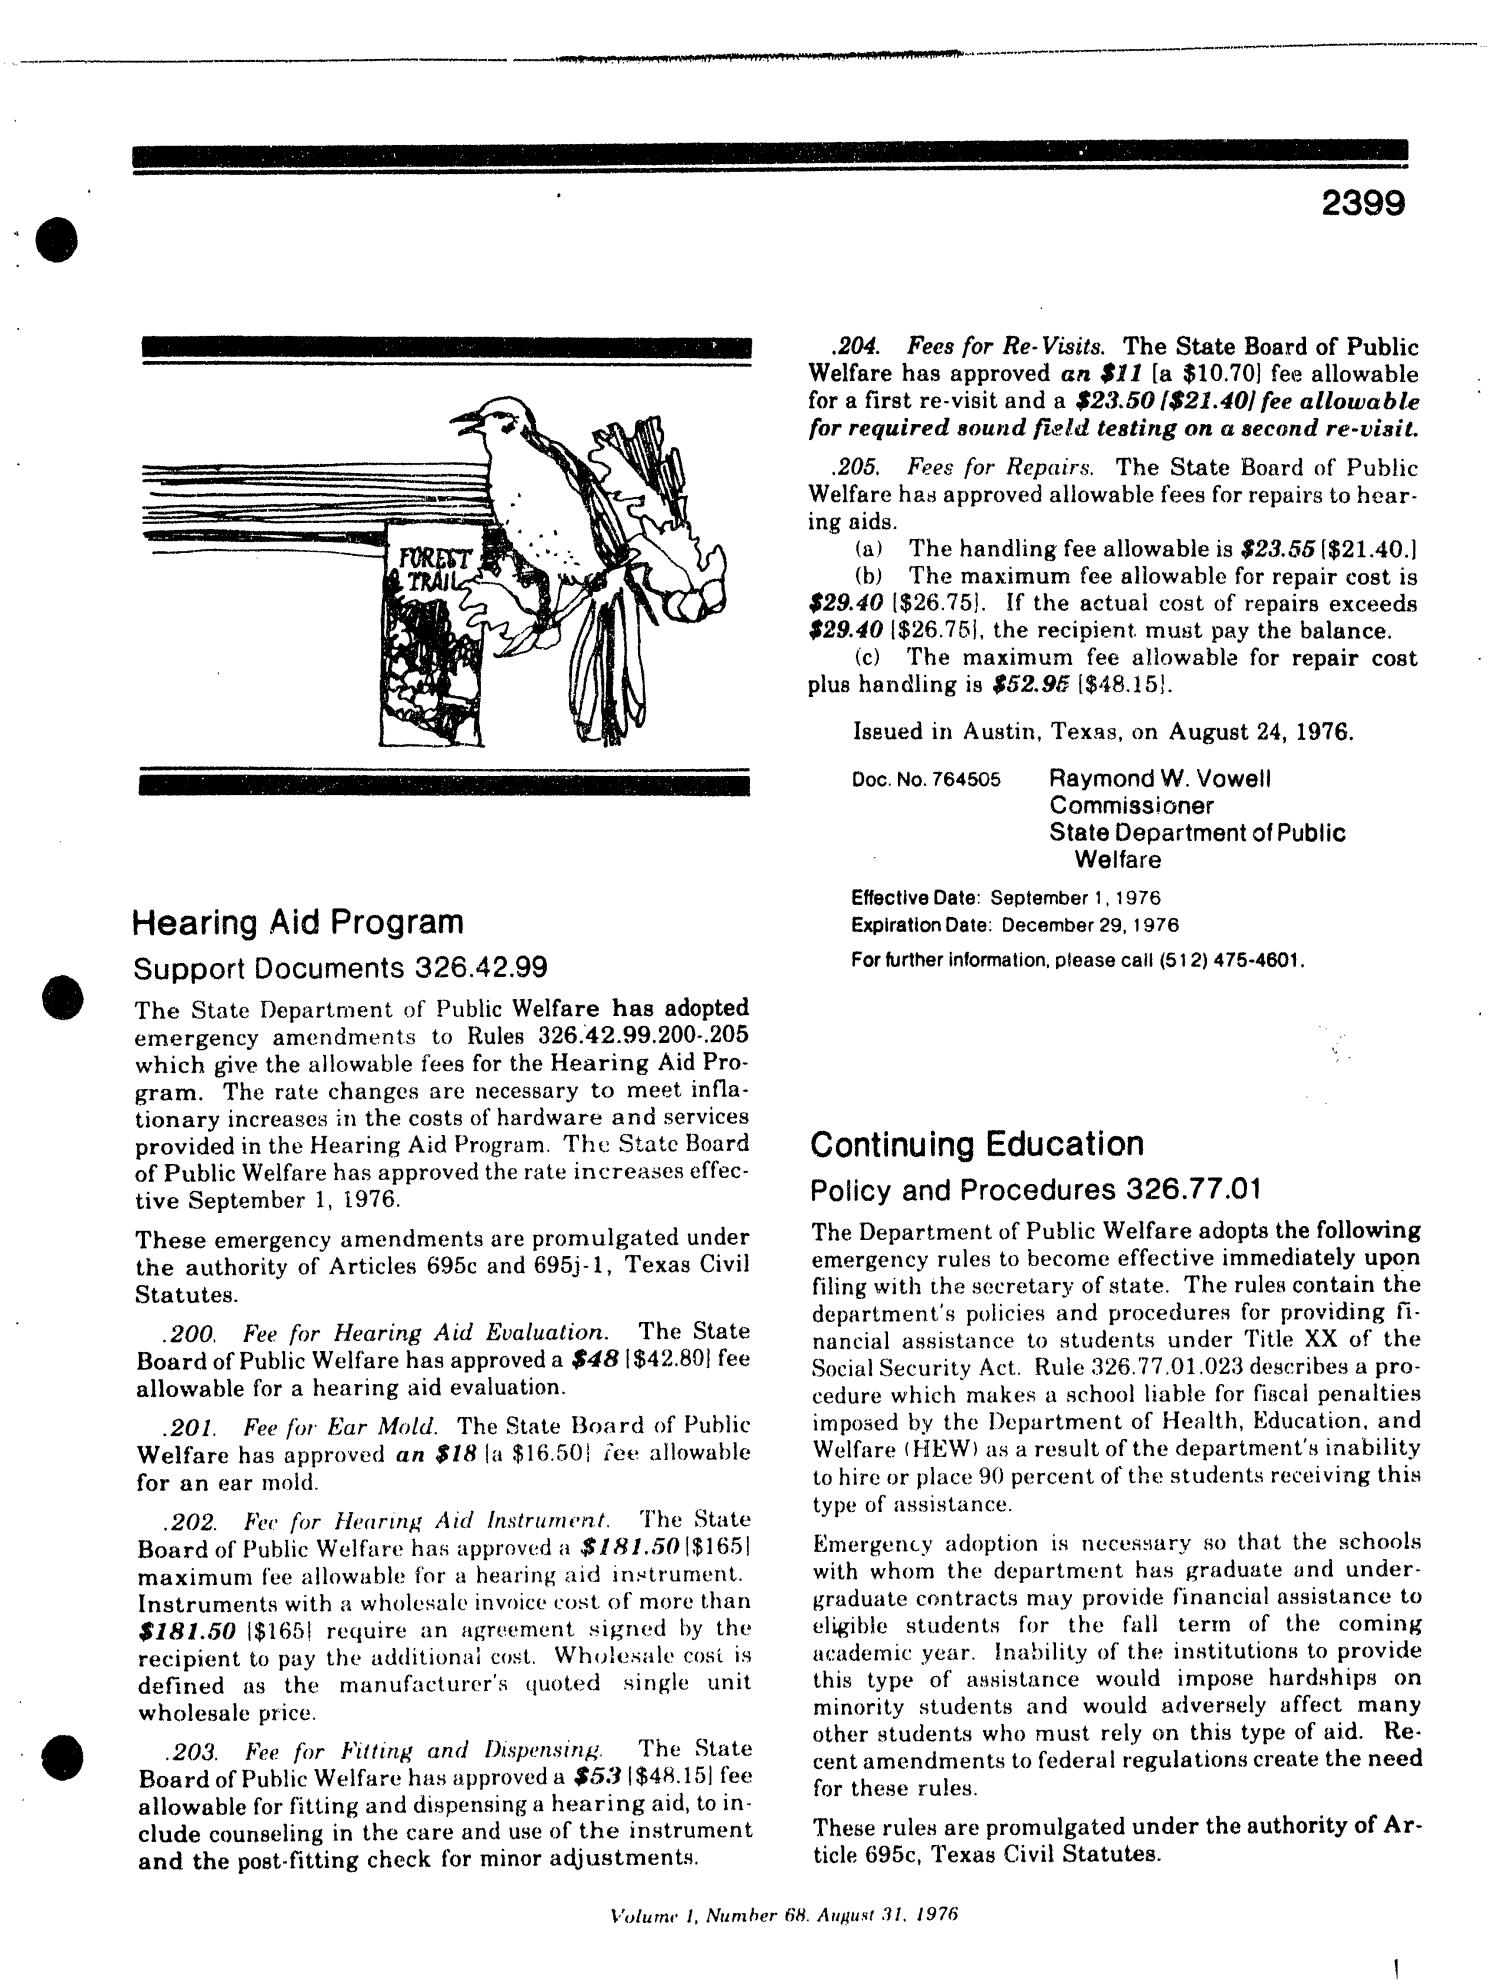 Texas Register, Volume 1, Number 68, Pages 2393-2438, August 31, 1976
                                                
                                                    2399
                                                